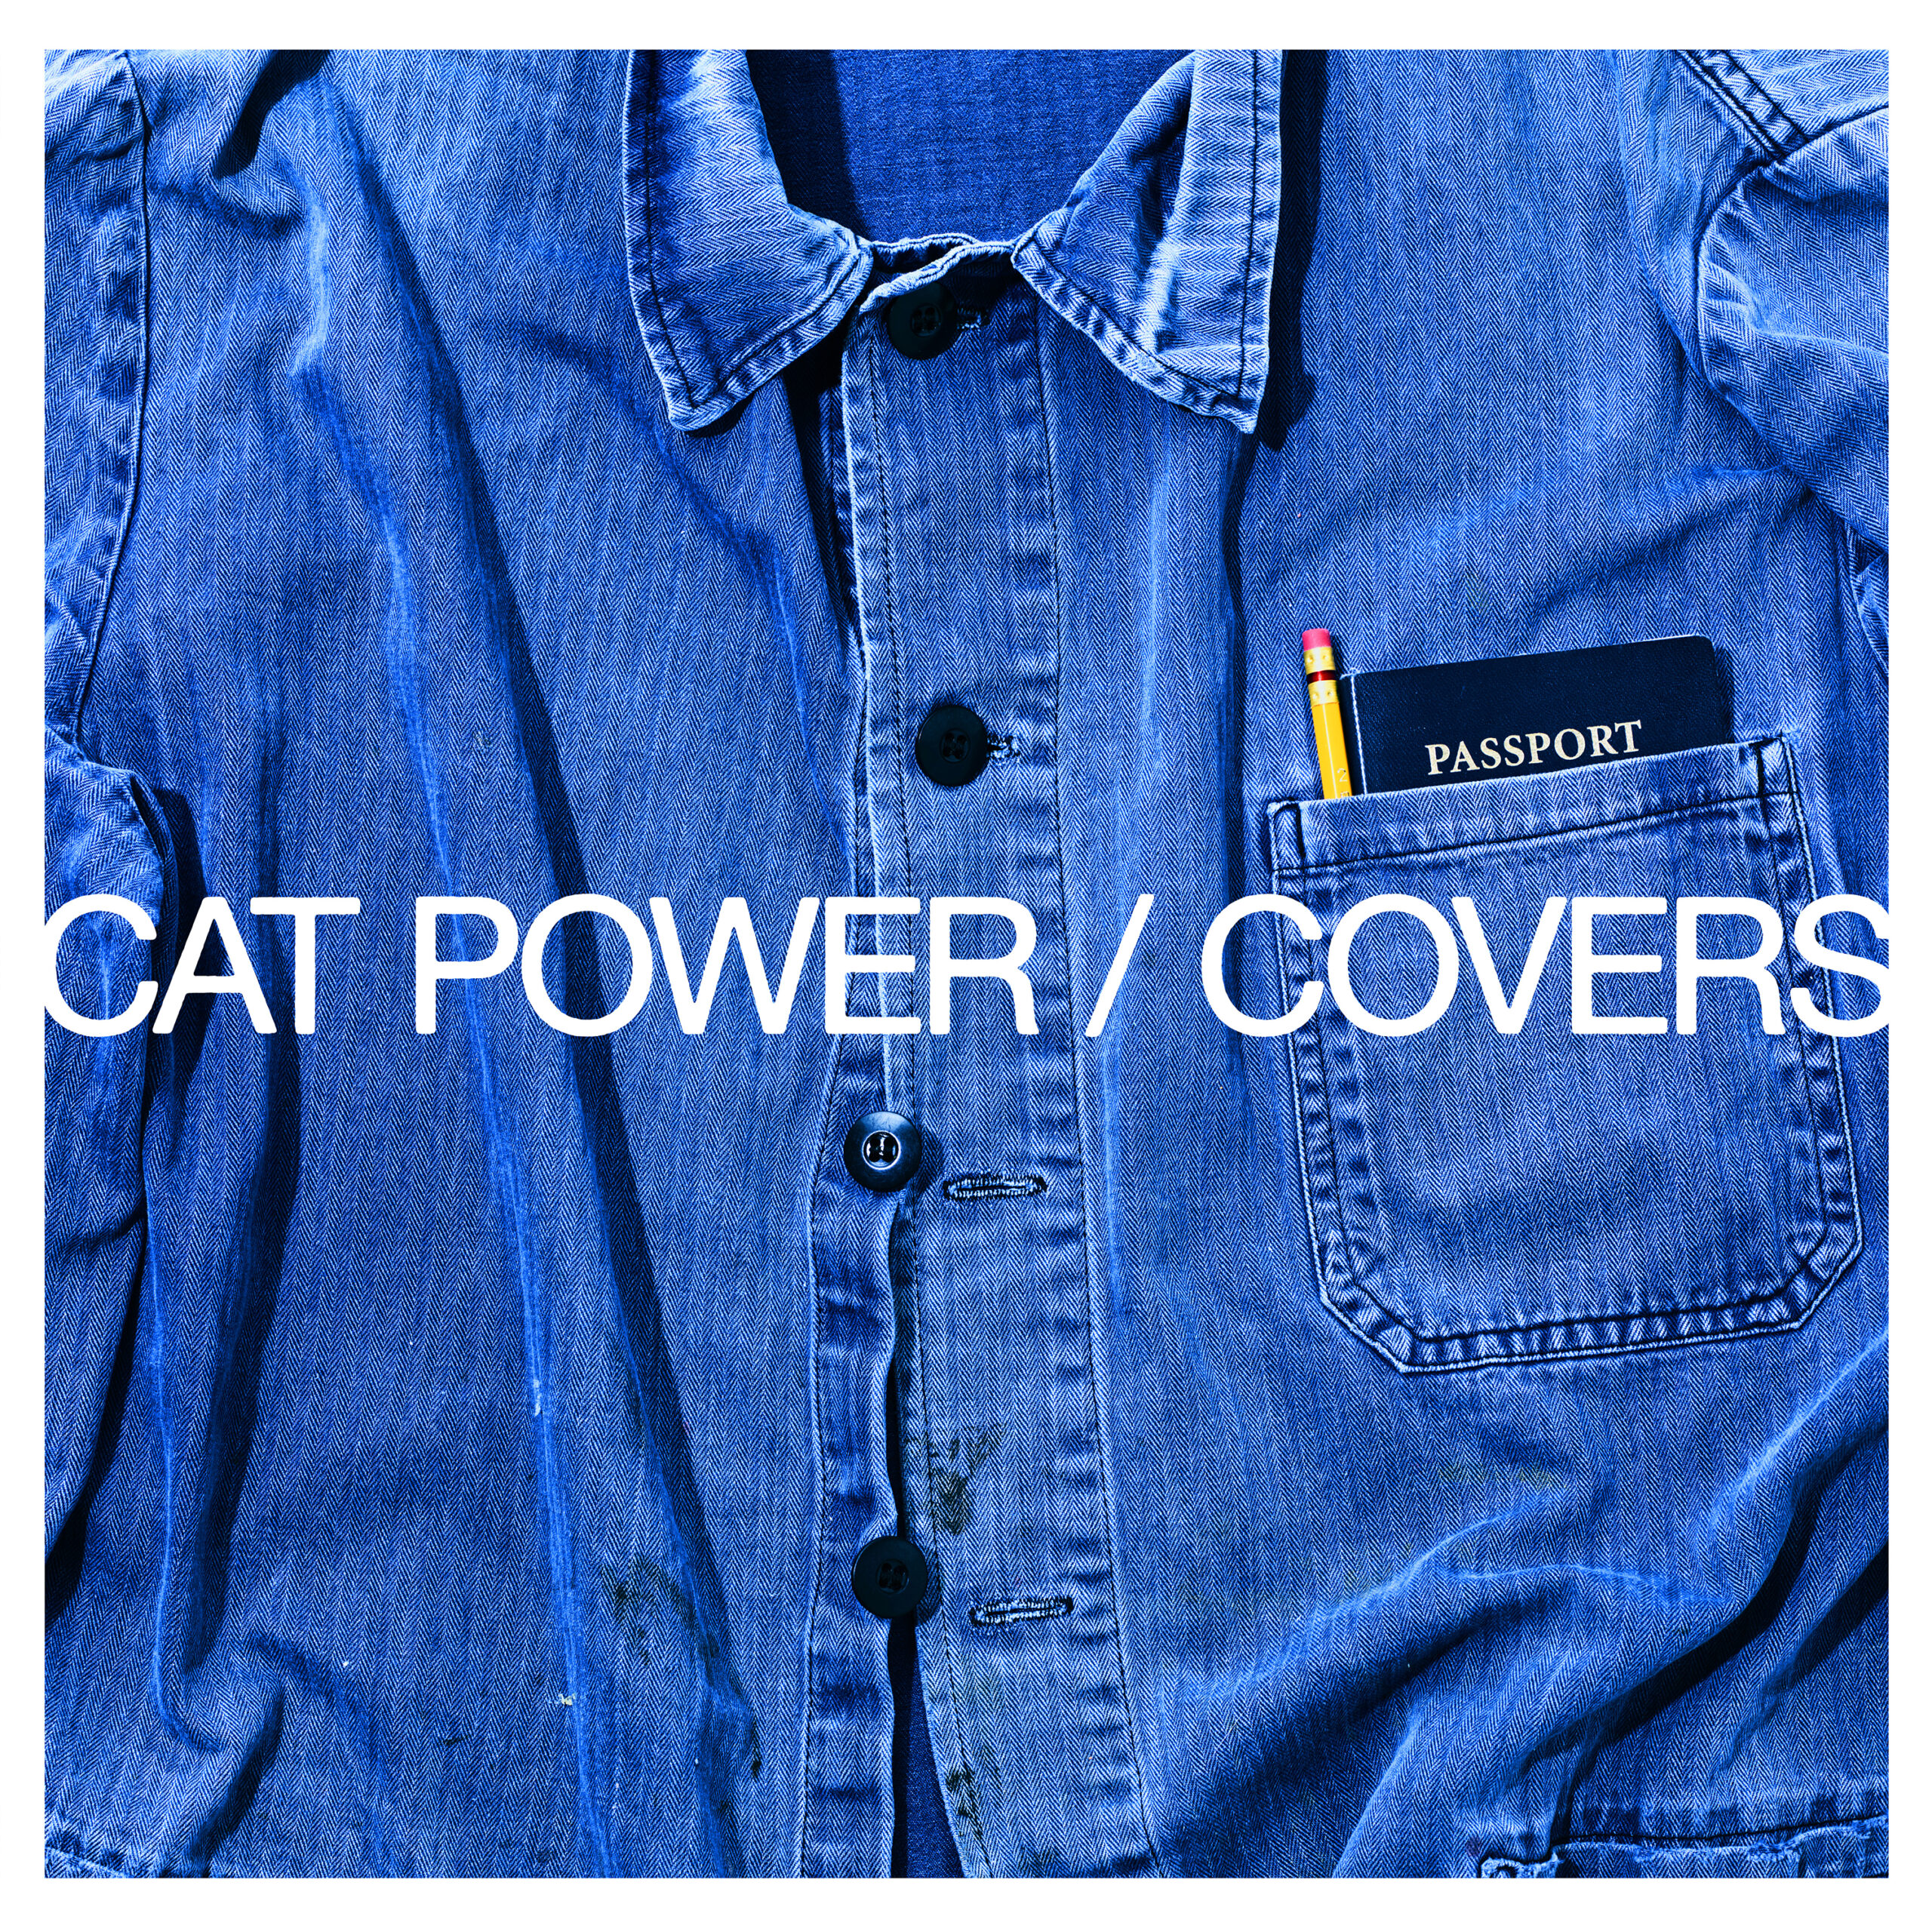 Cat Power - Covers (Albumcover)